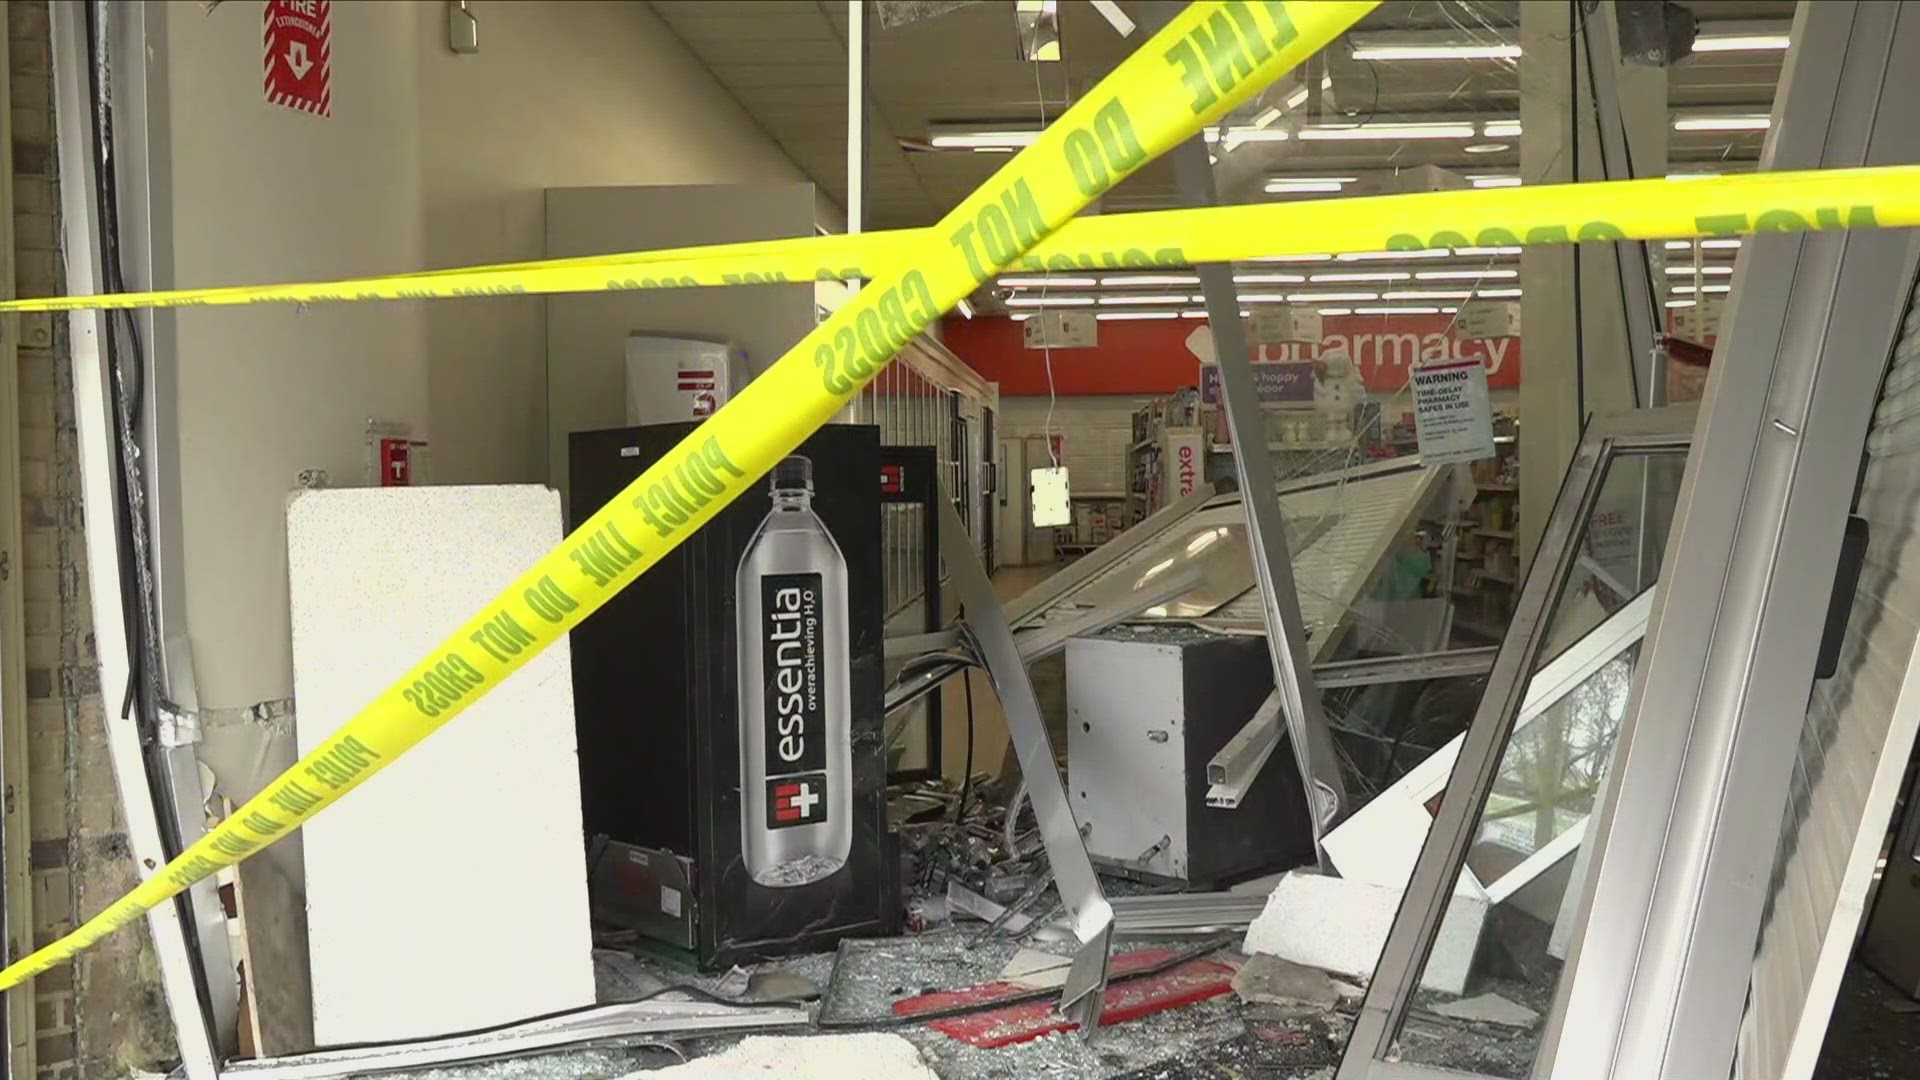 Despite finding the ATM damaged, police say it did not appear that any money had been stolen out of it.